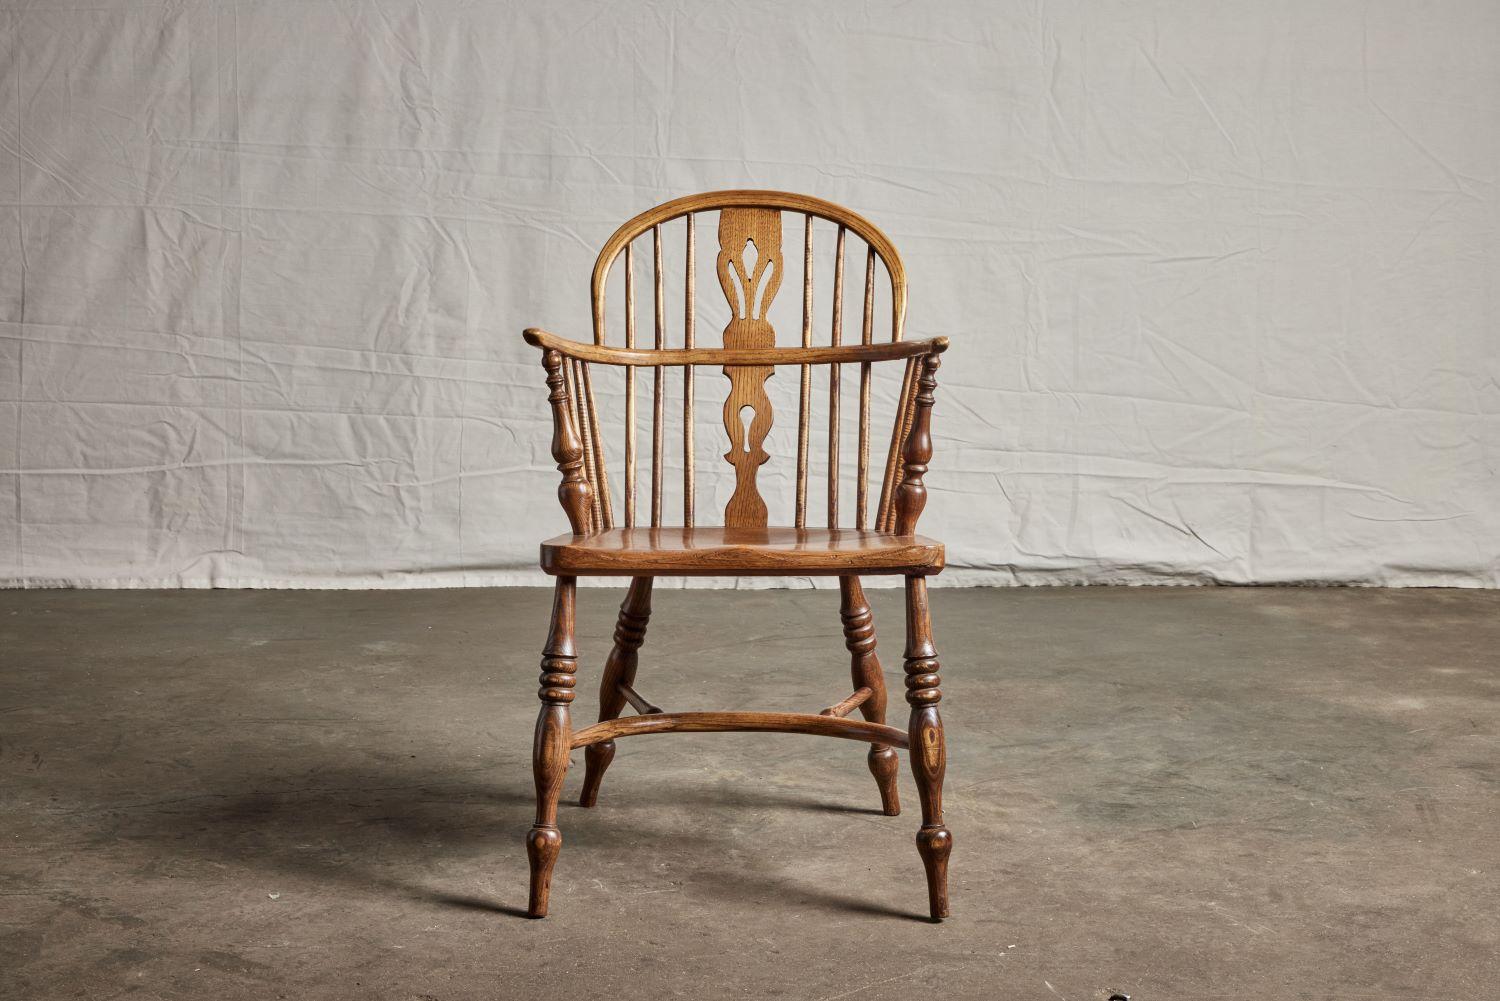 19th Century English low back chair.